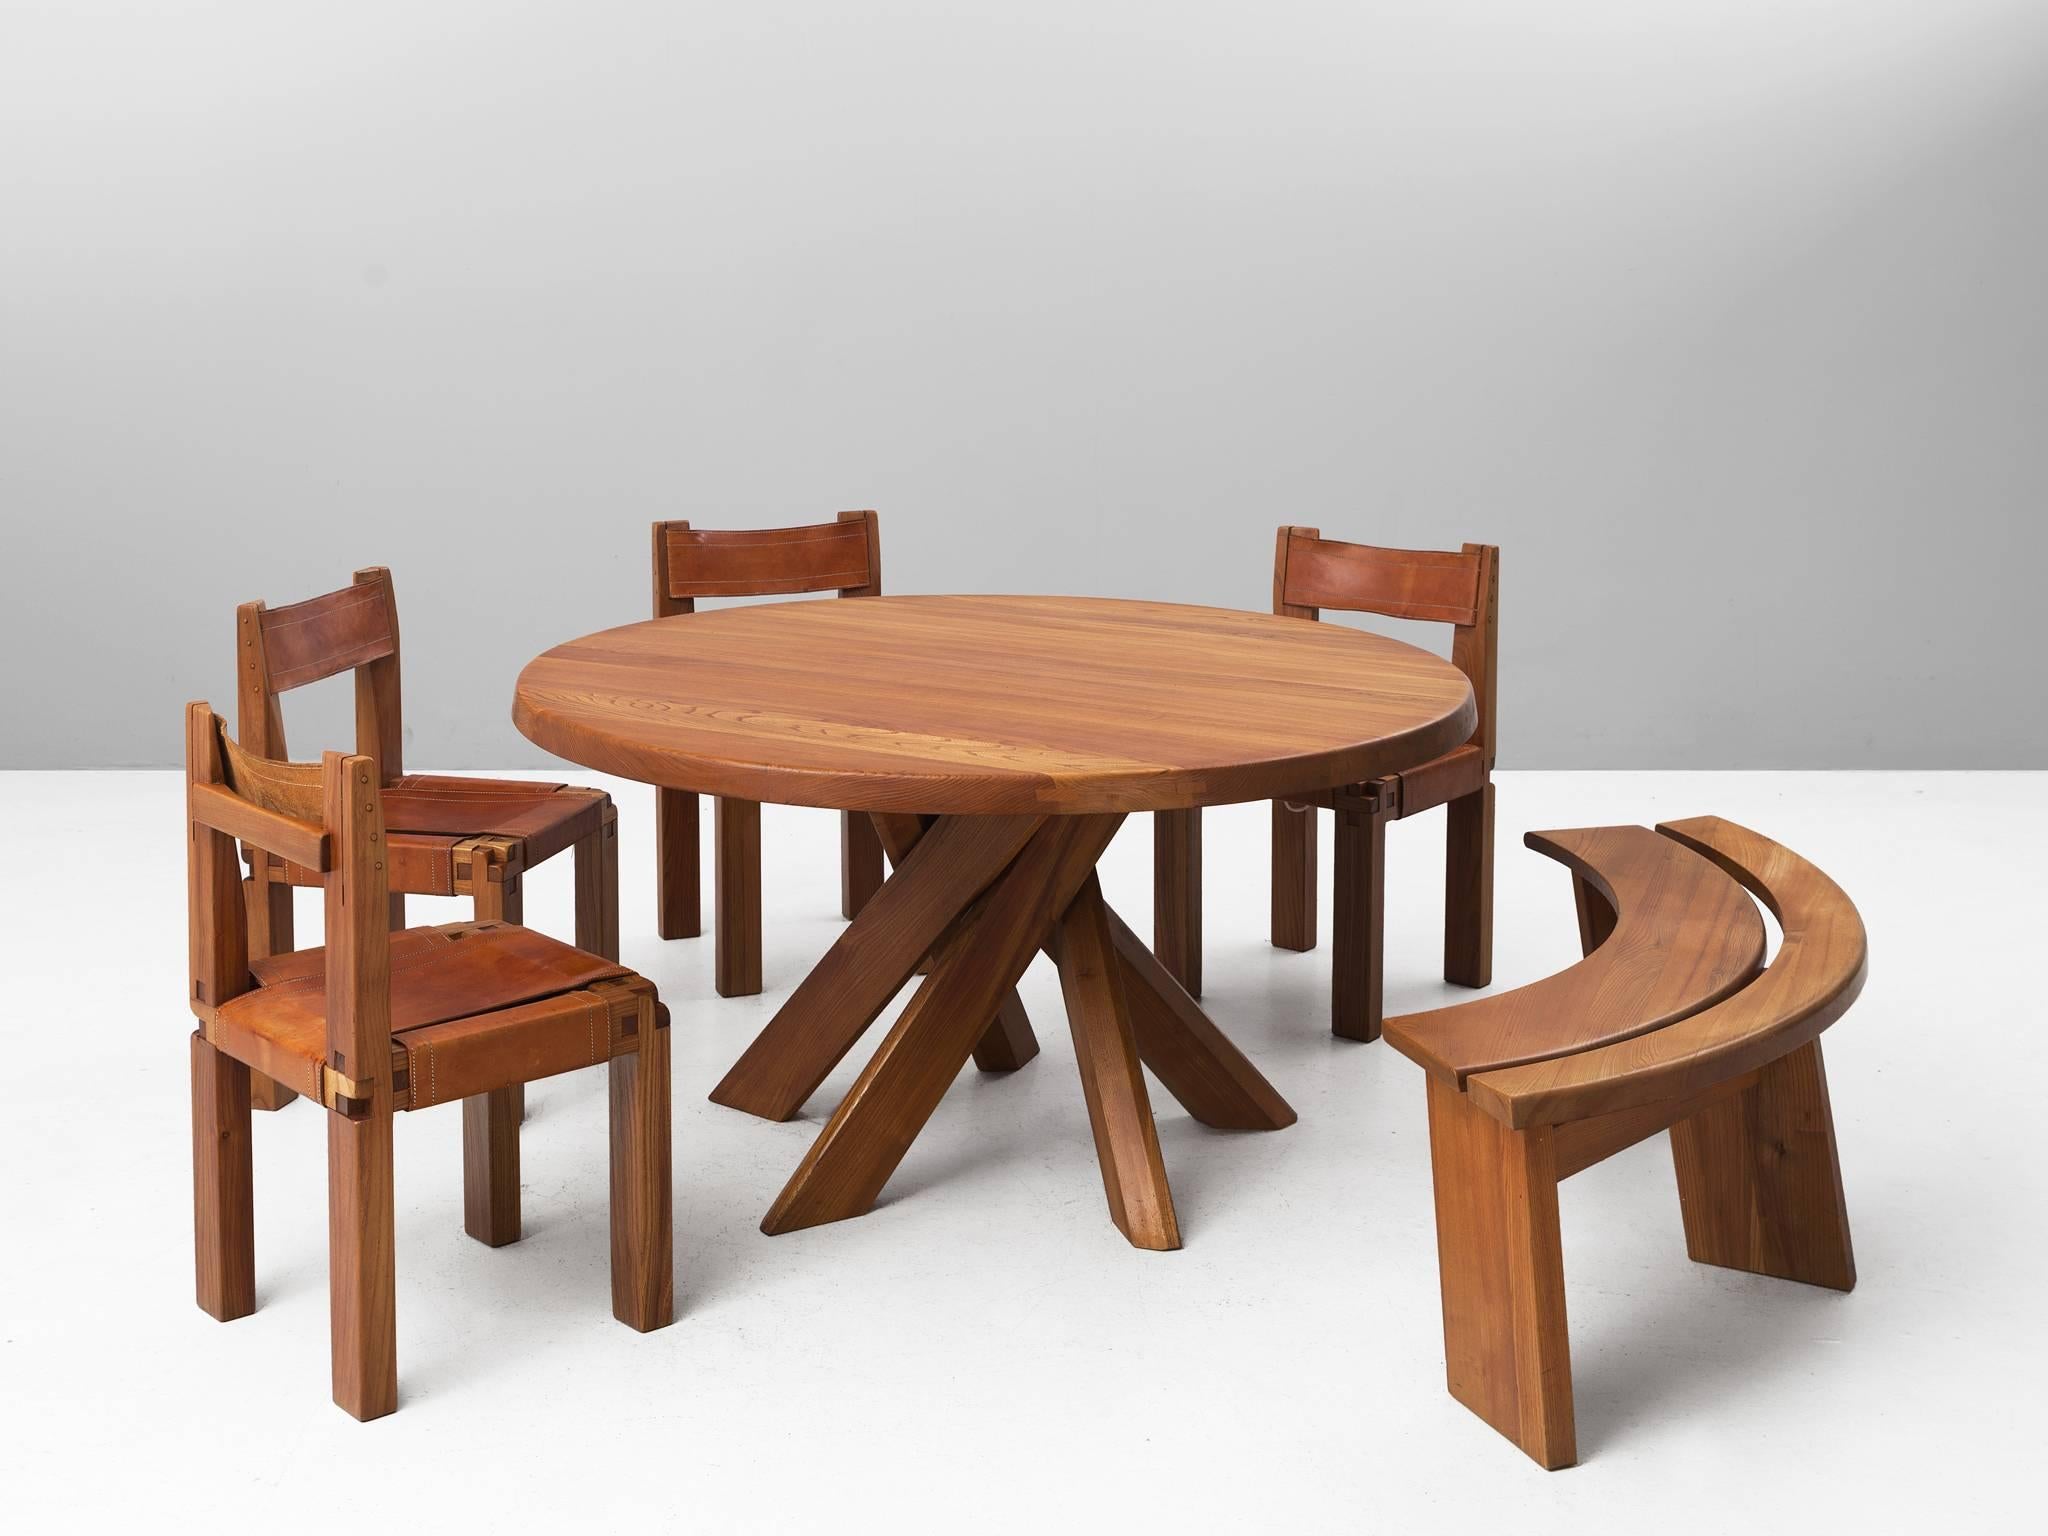 Dining room set, in pine and leather, by Pierre Chapo, France, 1960s.

Very complete dining room set by Franch designer and outrageous woodworker Pierre Chapo. This set consist of a round Sfax table, with a beautiful crossed leg base. Four chairs,